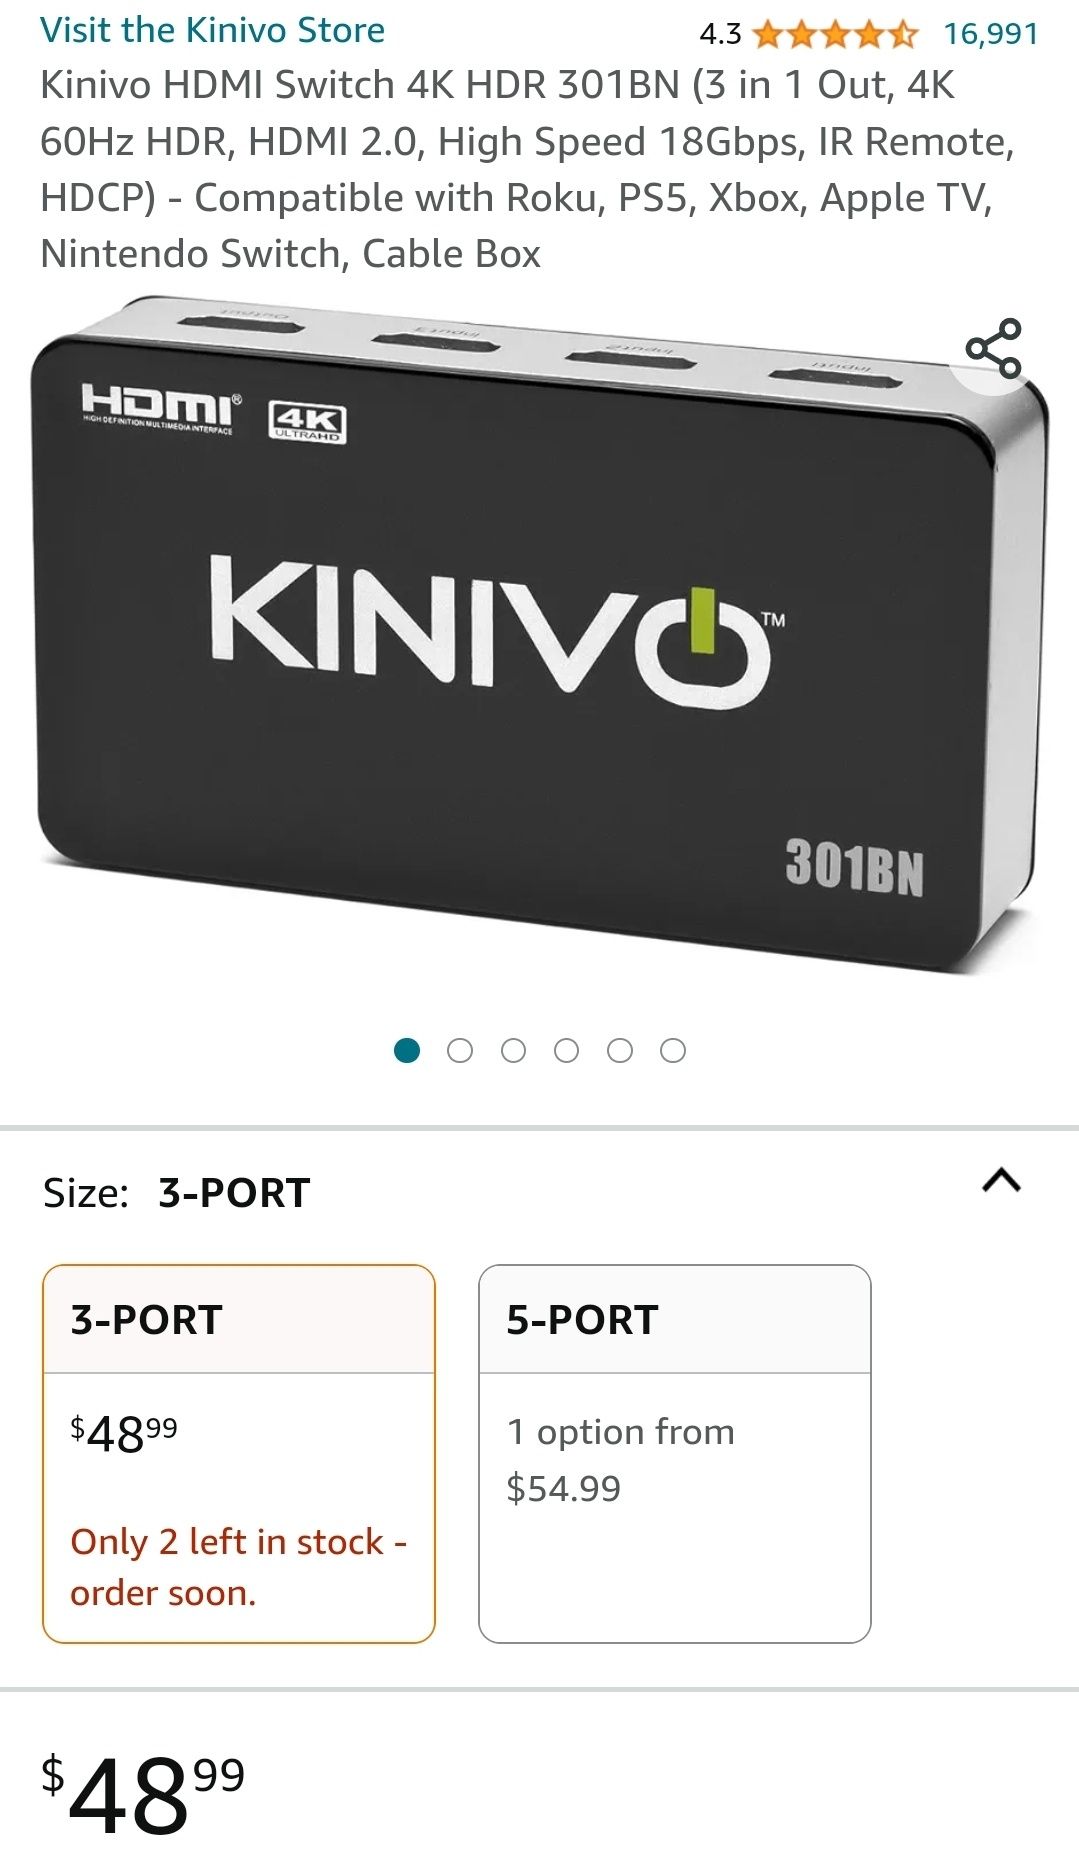 Kinivo HDMI Switch 4K 301BN (3 in 1 Out, 4K 30Hz